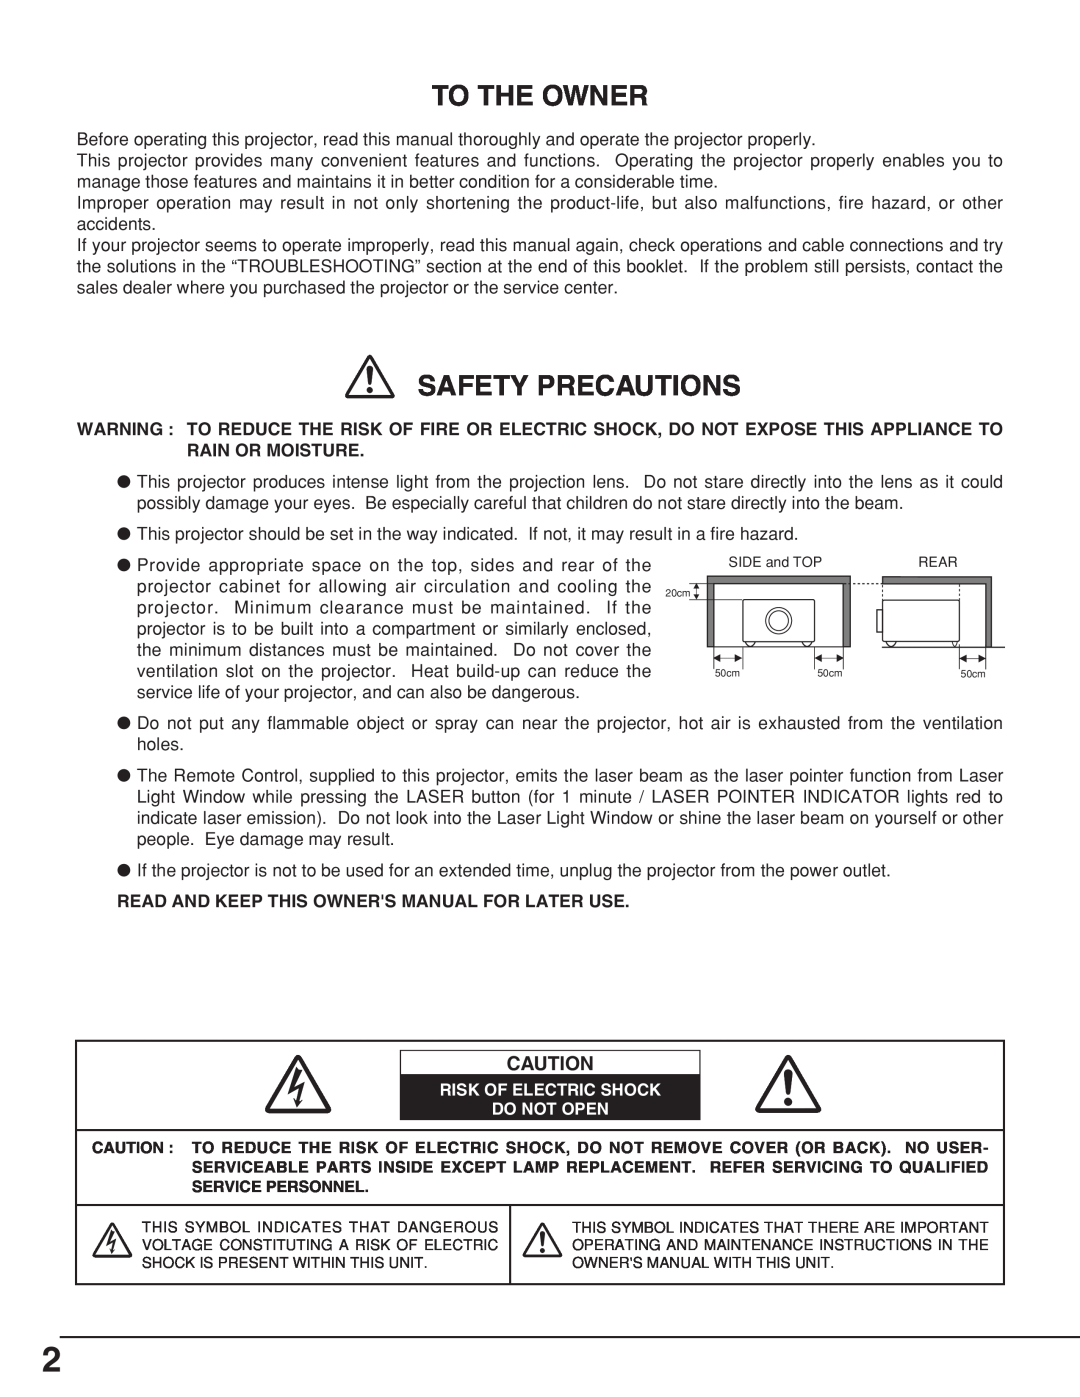 Eiki LC-XNB5M owner manual To The Owner, Safety Precautions, Read And Keep This Owners Manual For Later Use 